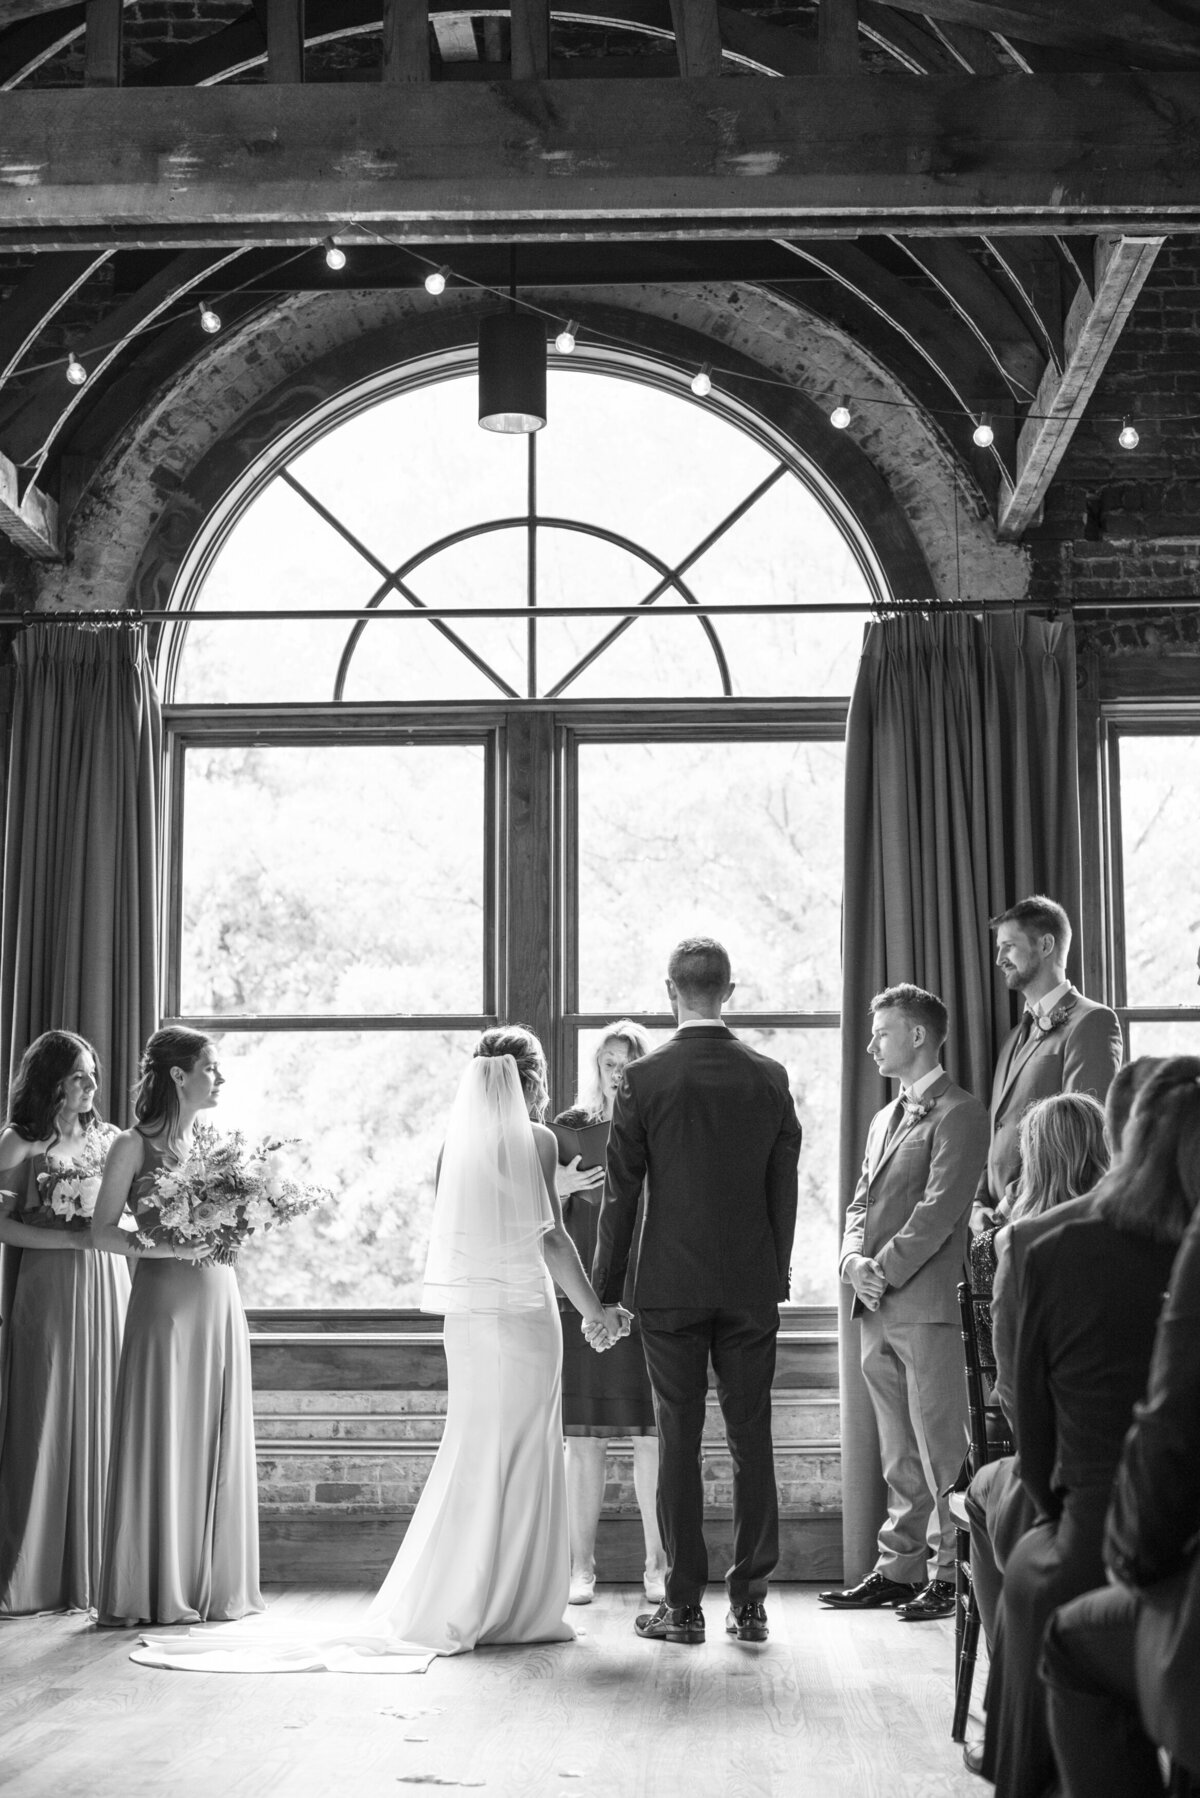 Century Room in Asheville NC wedding photography